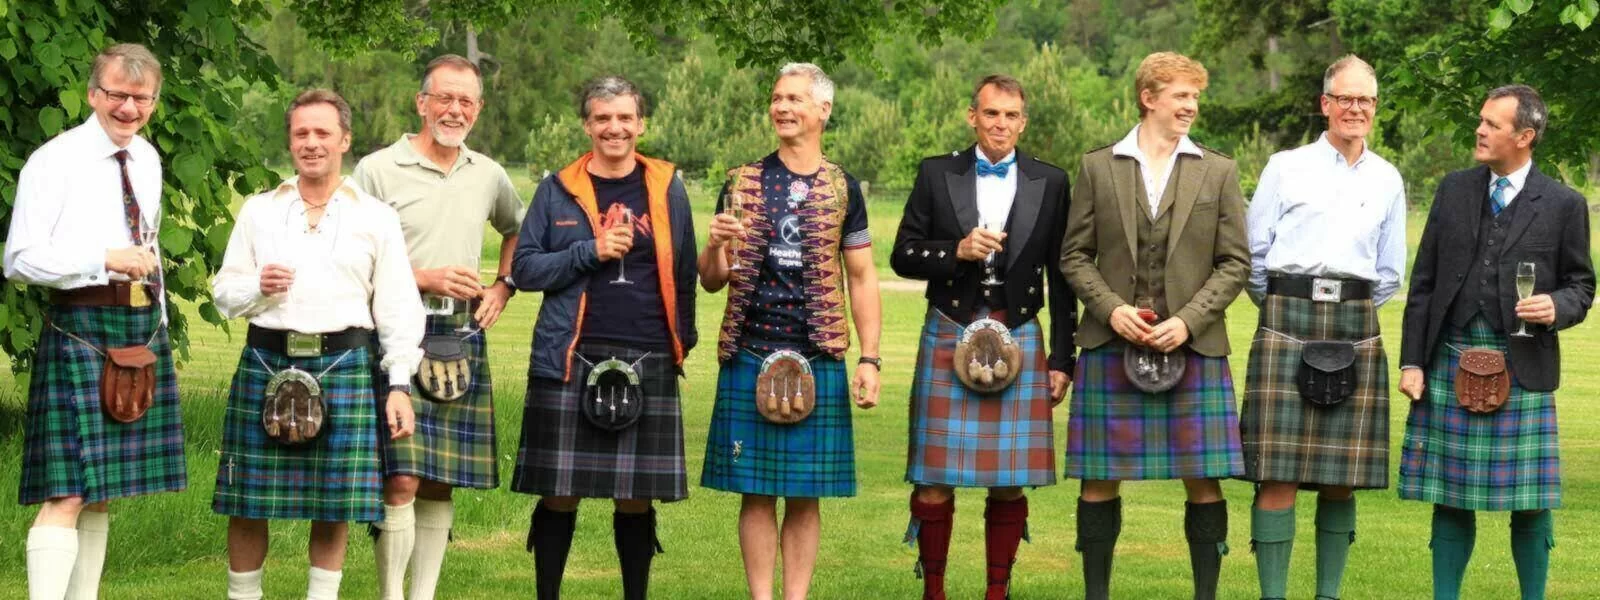 Kilts For Everyone